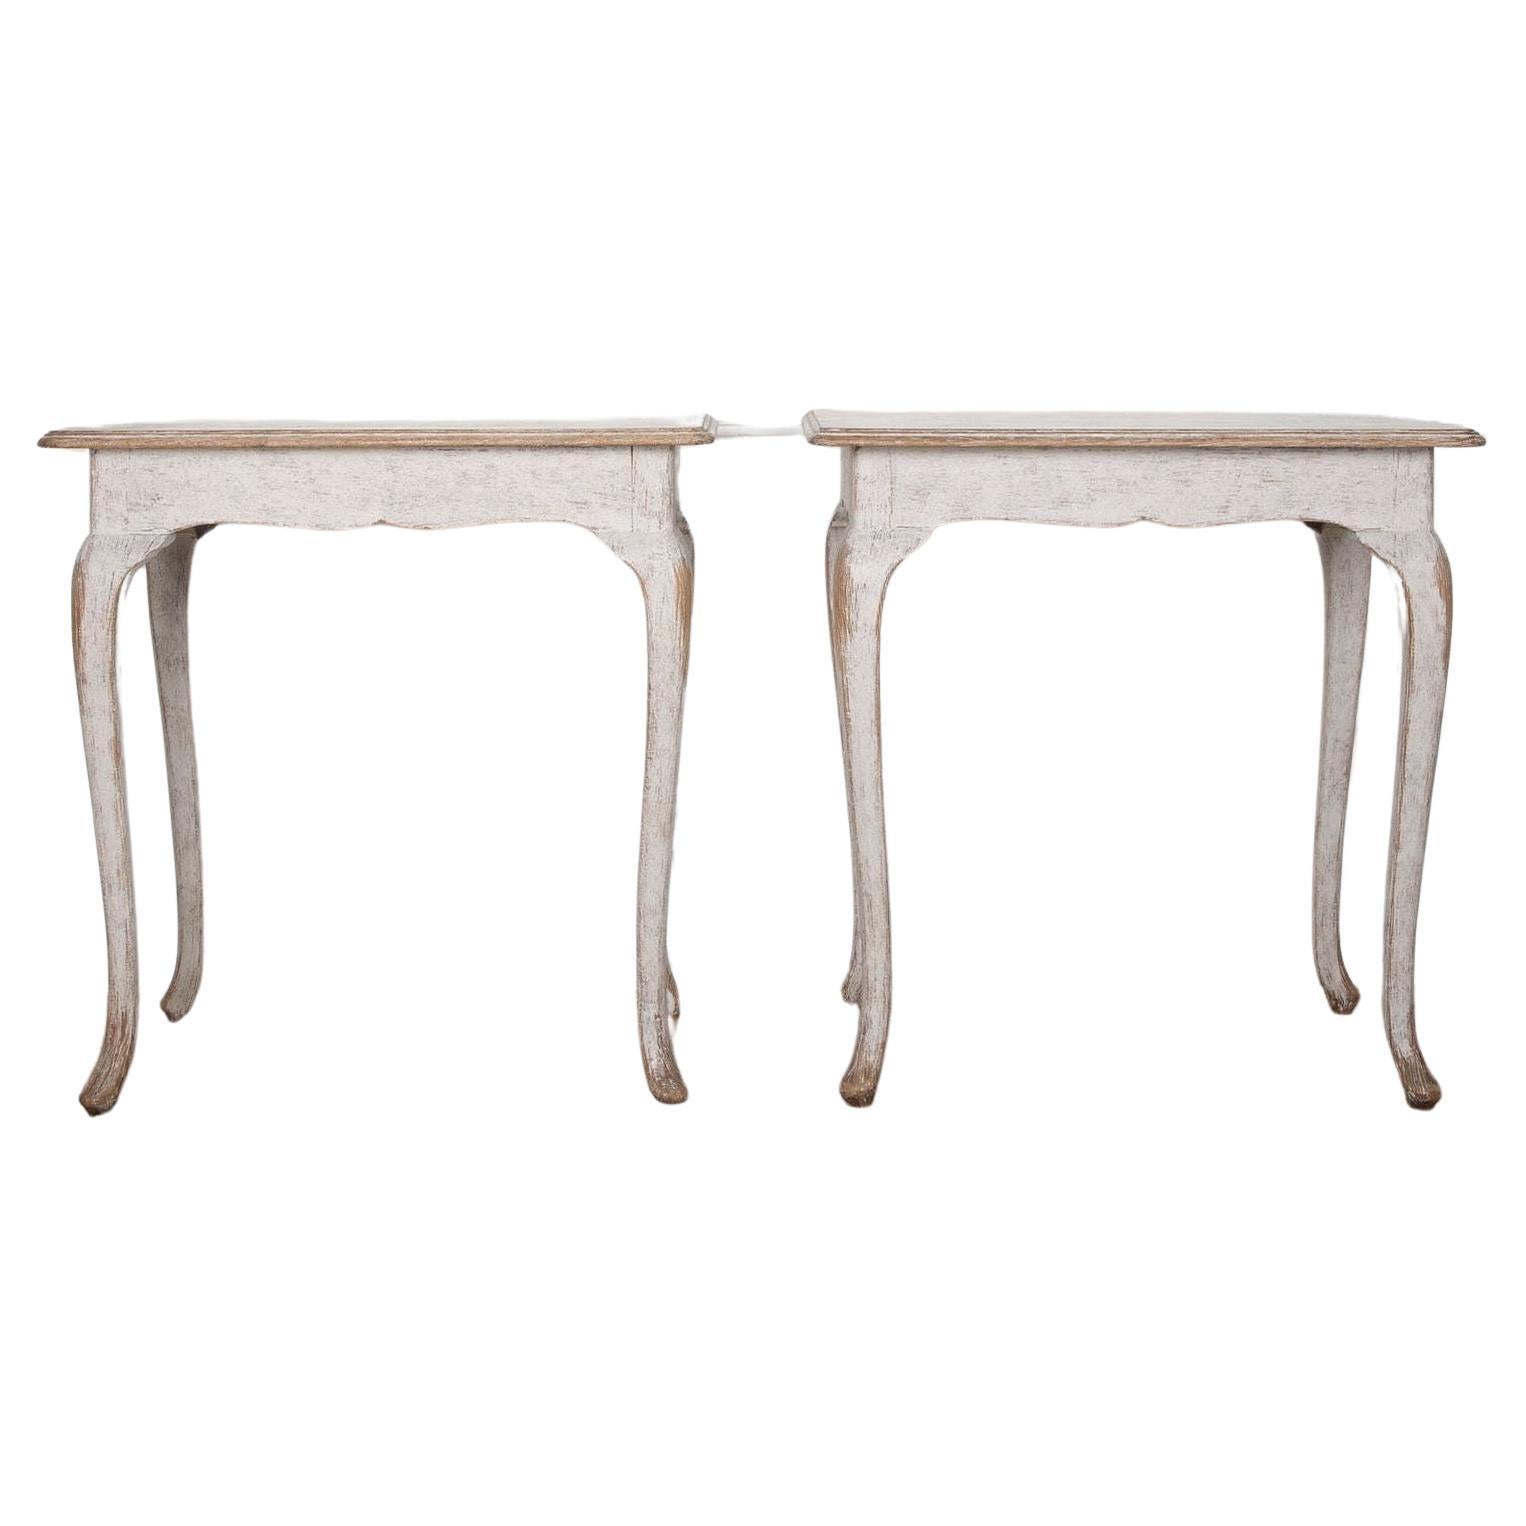 Pair of 19th Century Swedish Rococo Style Side Tables For Sale